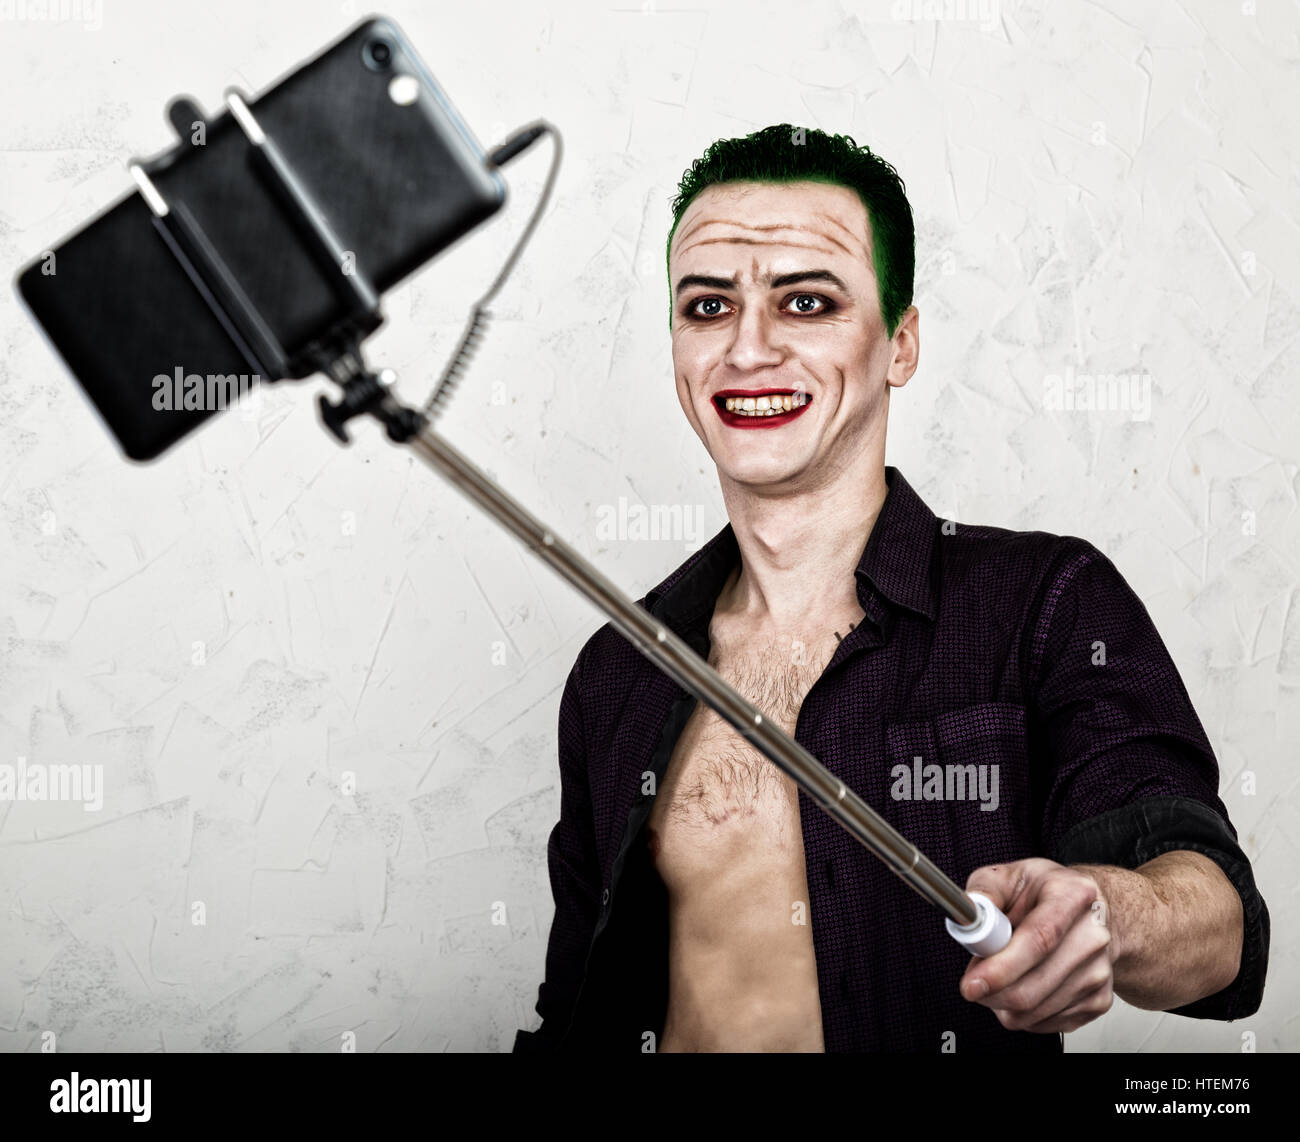 guy with crazy joker face, green hair and idiotic smile. carnaval costume.  making selfy photo Stock Photo - Alamy